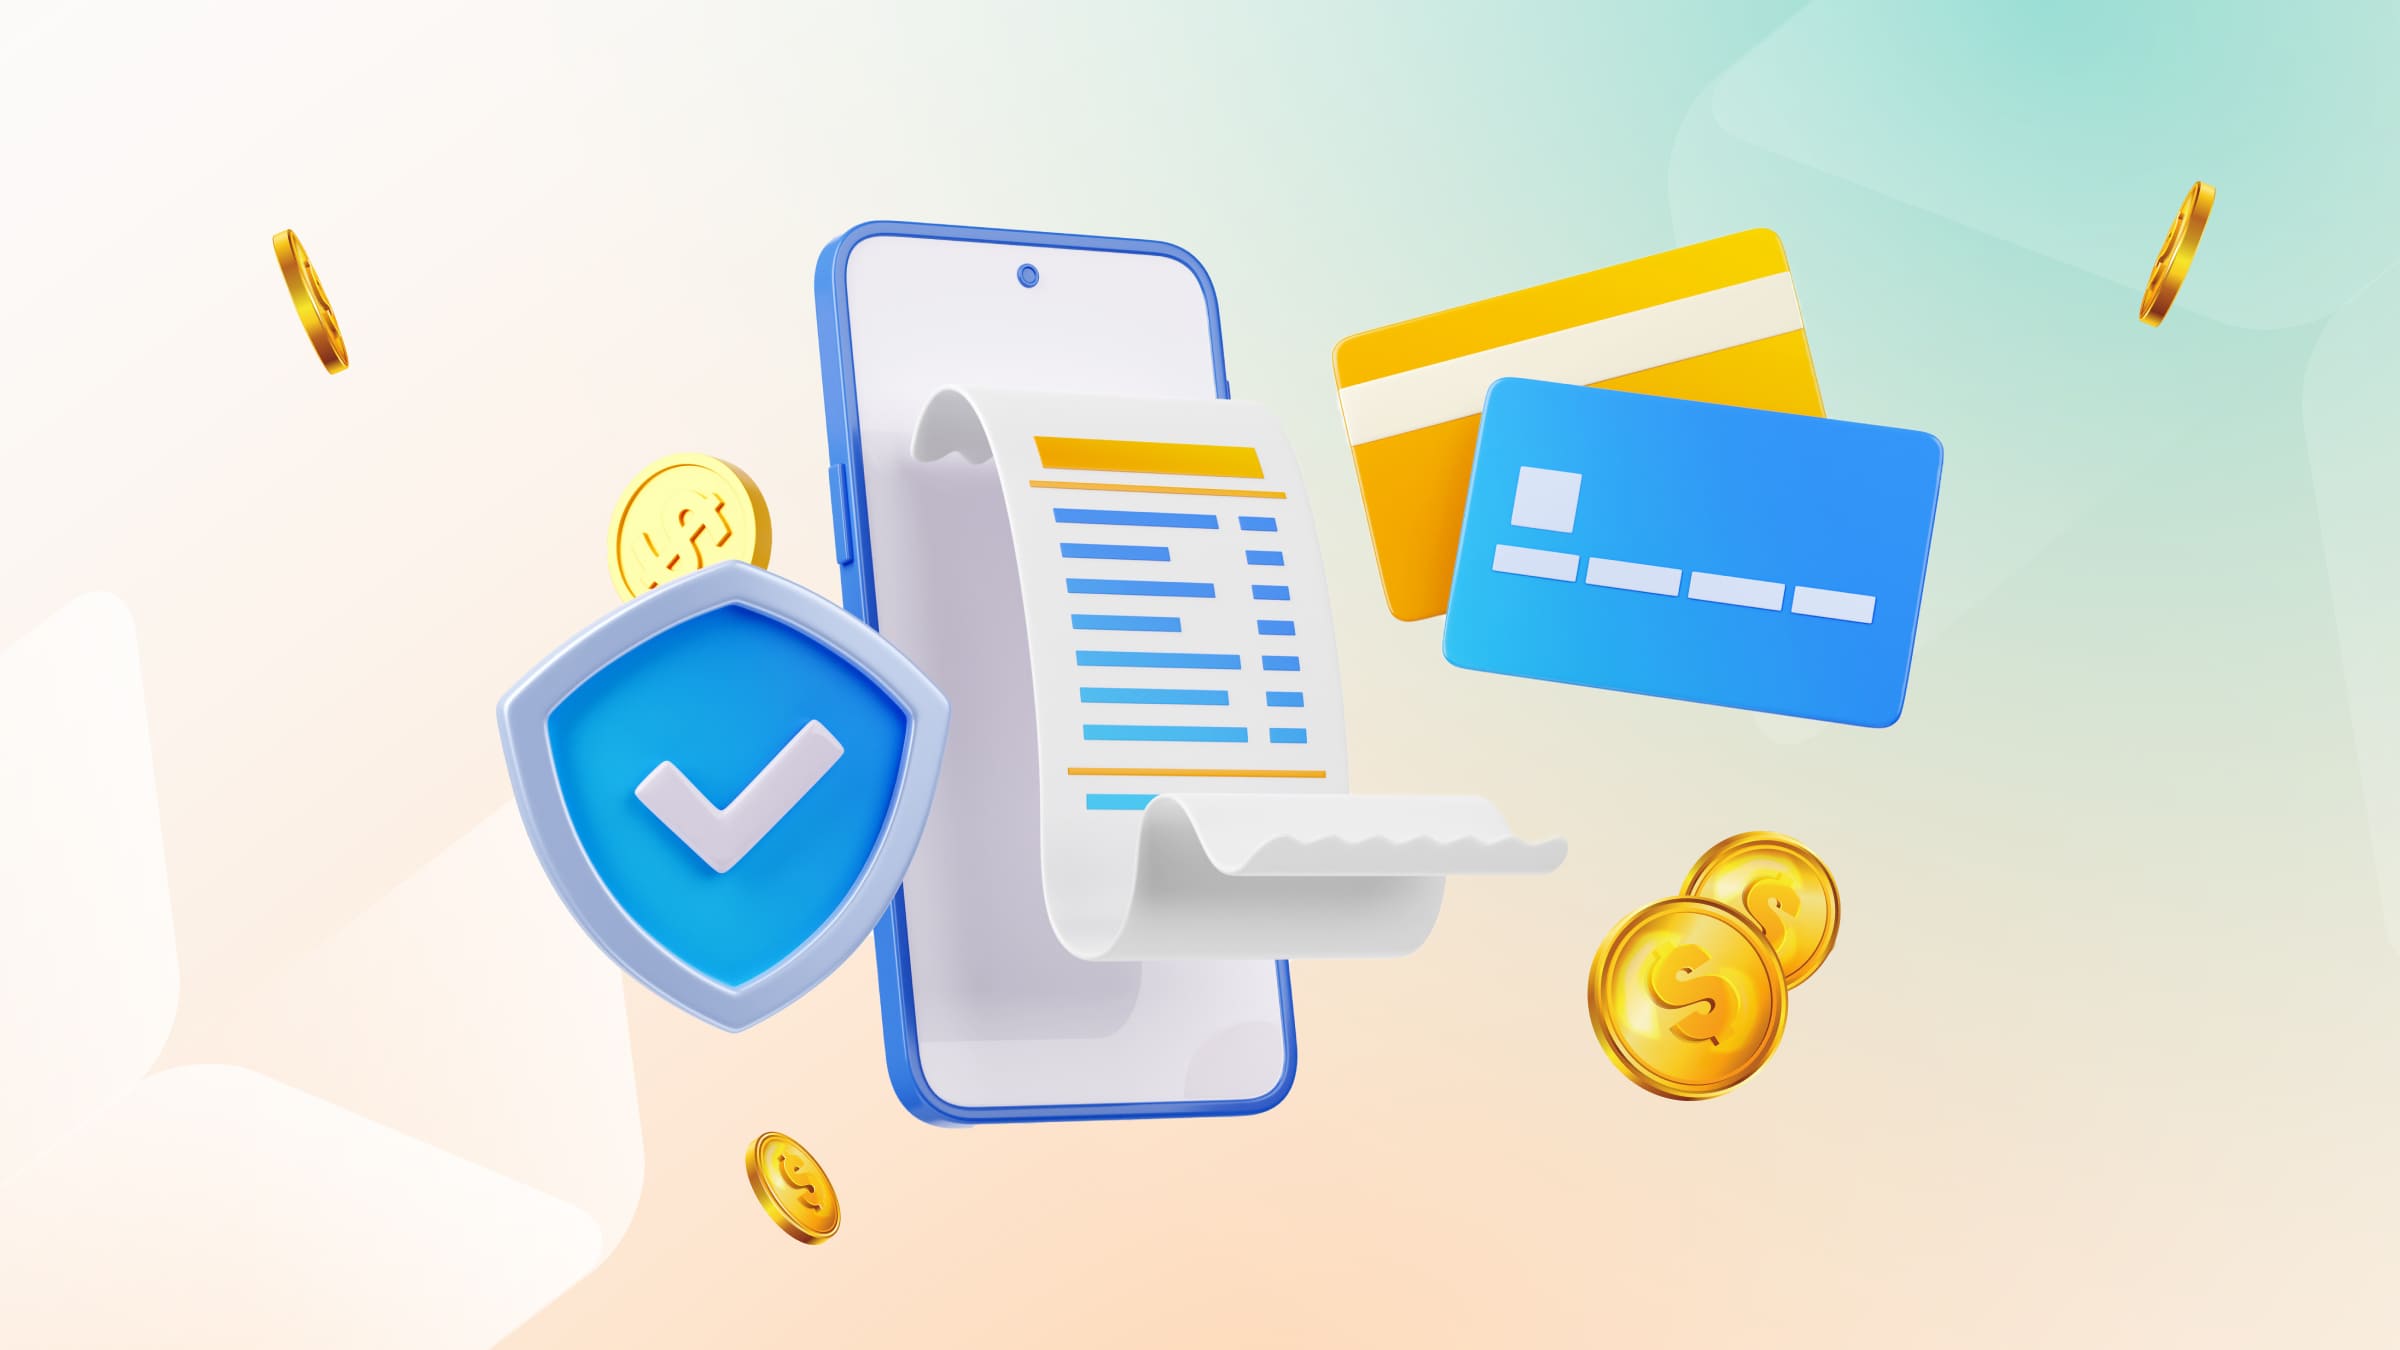 To attract customers who pay in cryptocurrency, an entrepreneur can add cryptocurrency acceptance icons to the website.